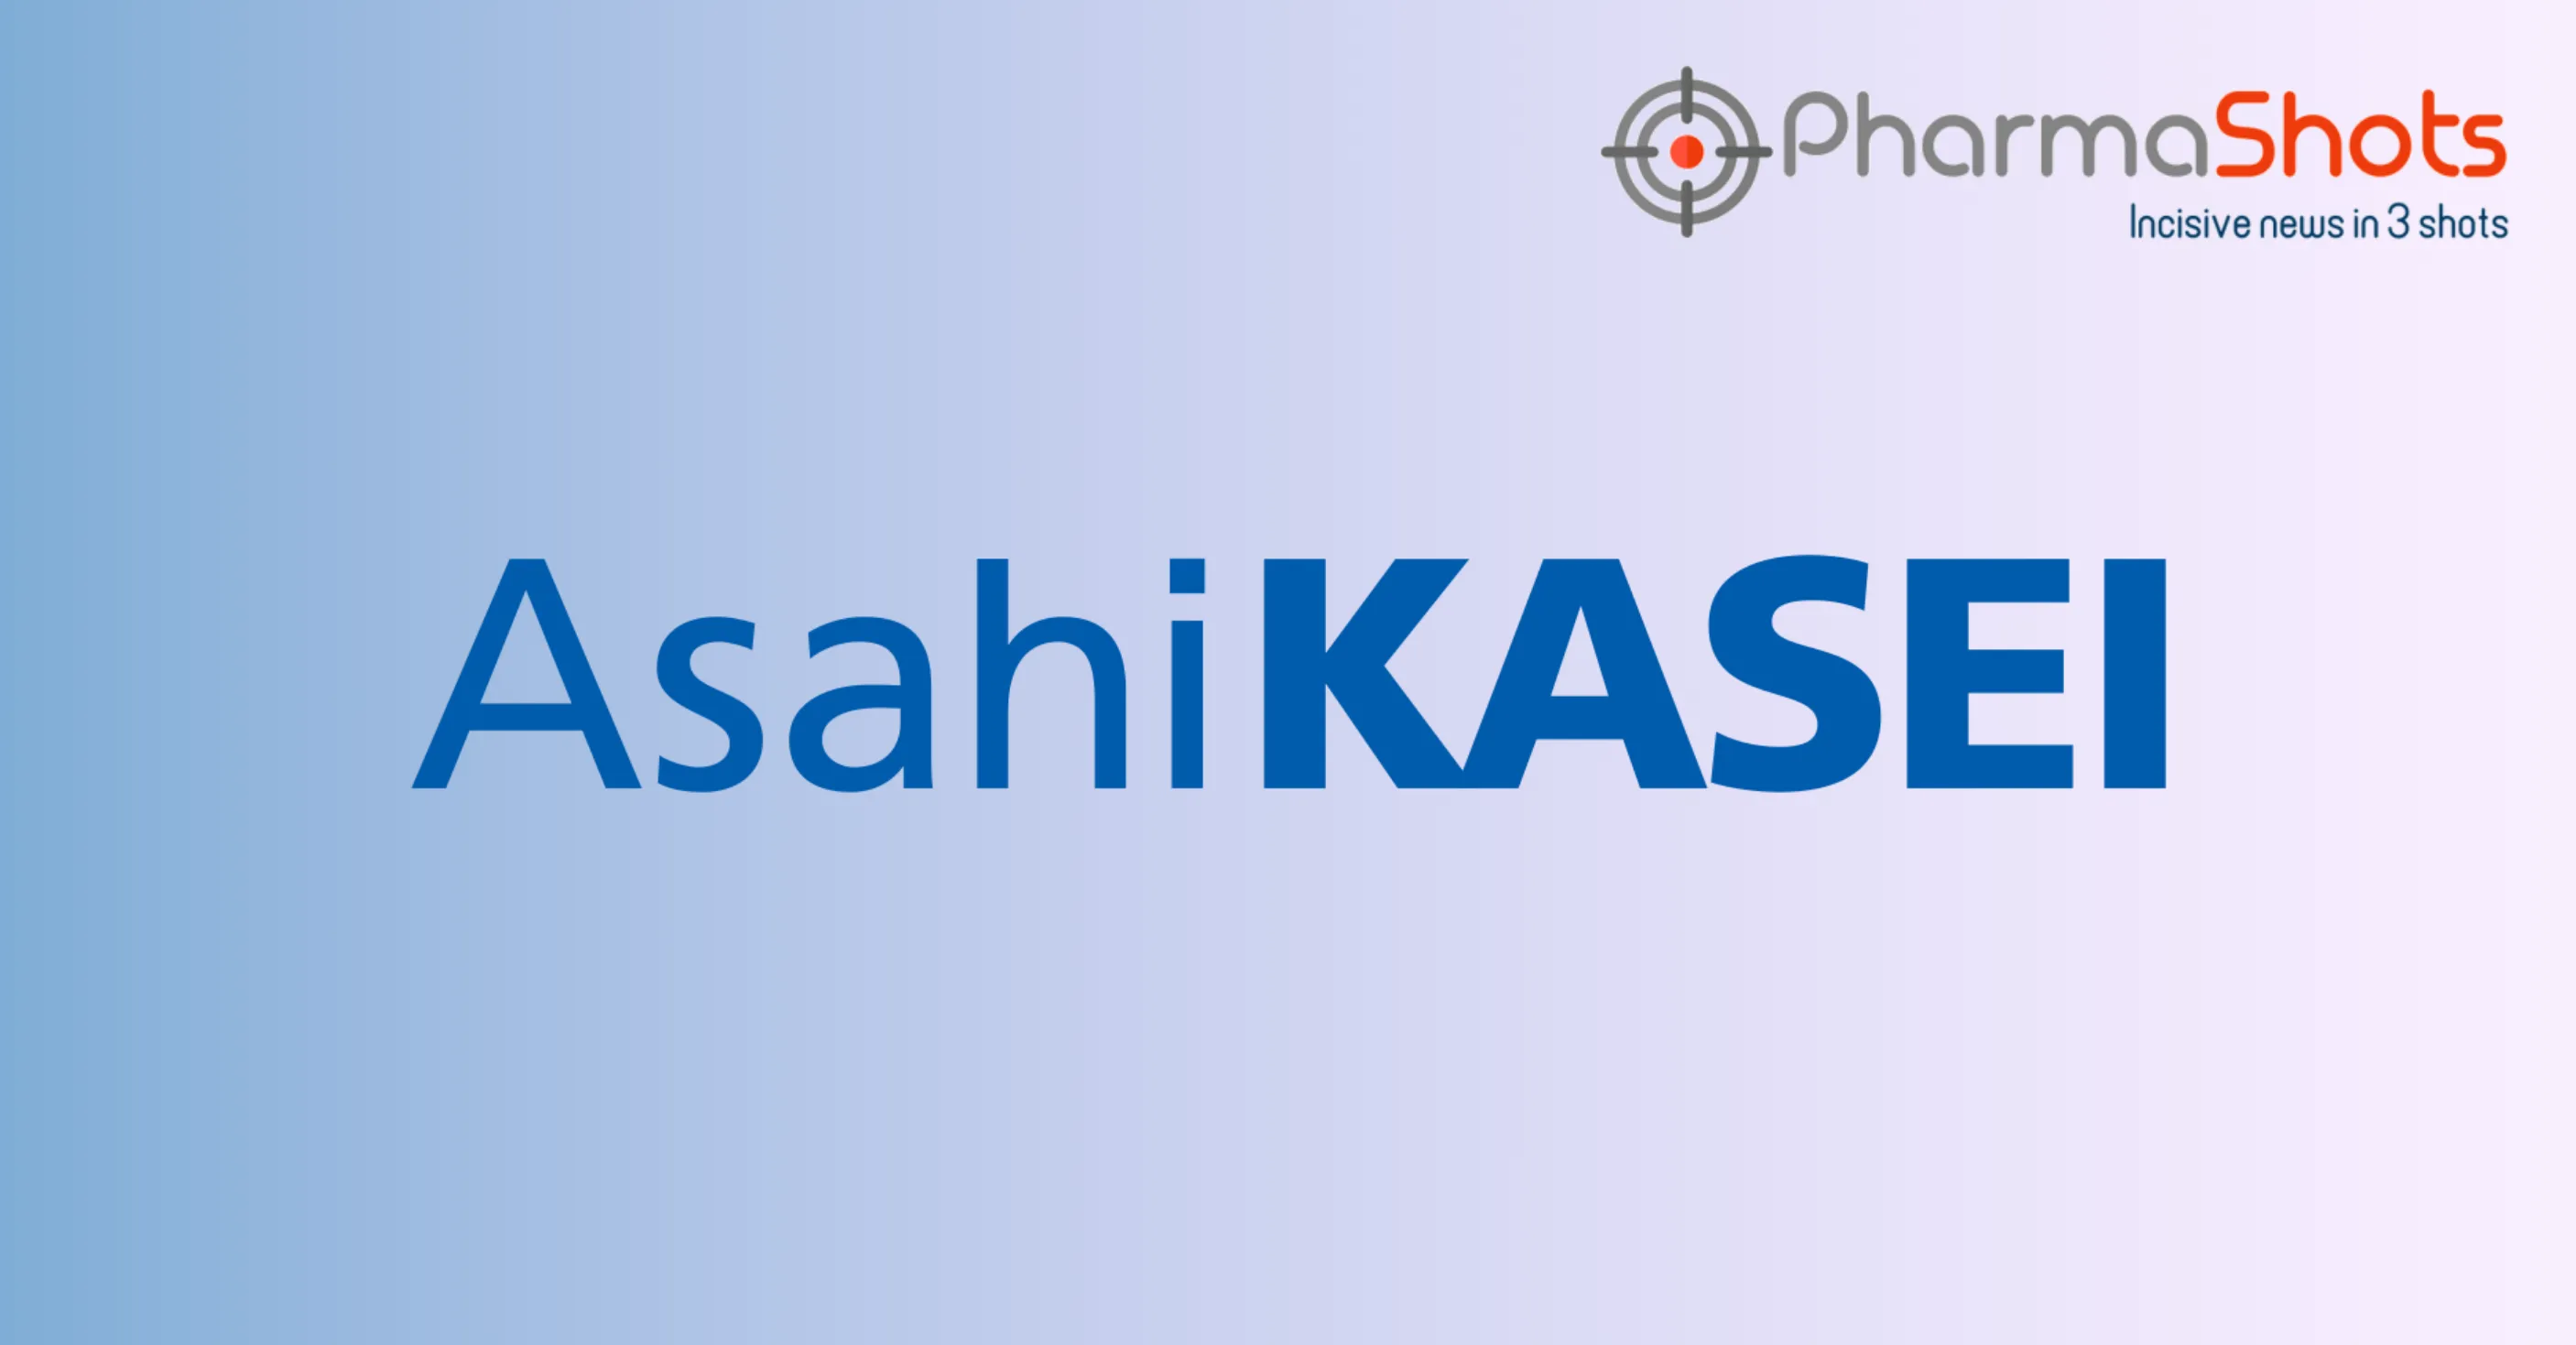 Asahi Kasei Reports the Acquisition of Calliditas Therapeutics for an Aggregate of ~$1.11B